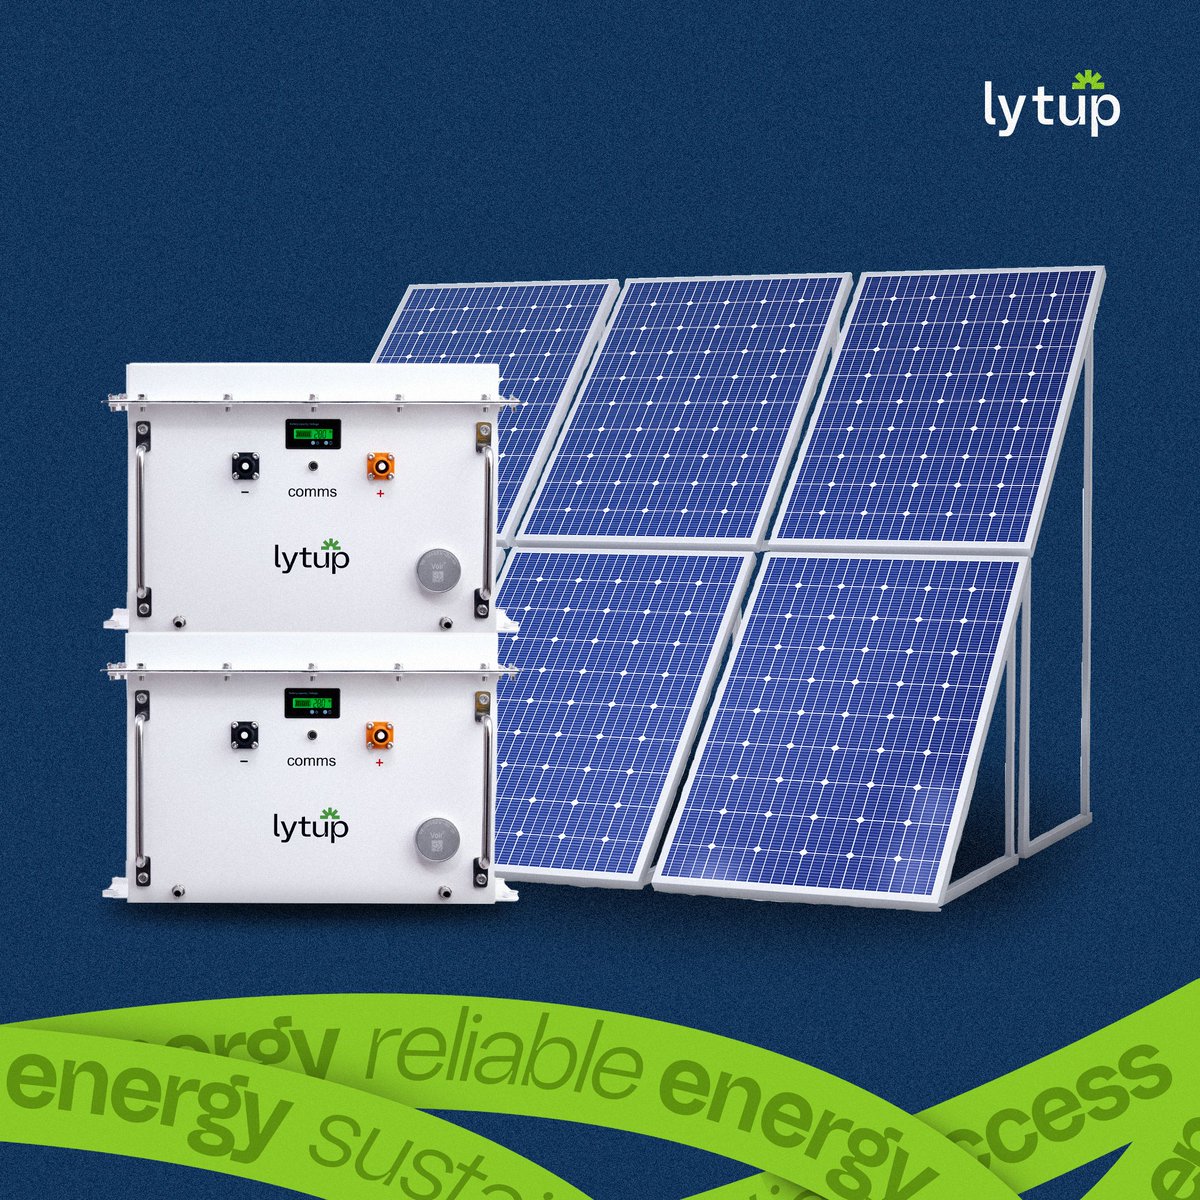 The Lytup battery modules (Lytvolt S7000) provide a robust combination of security, reliability, and efficiency.

More about this on our website - lytup.co

#affordableenergy